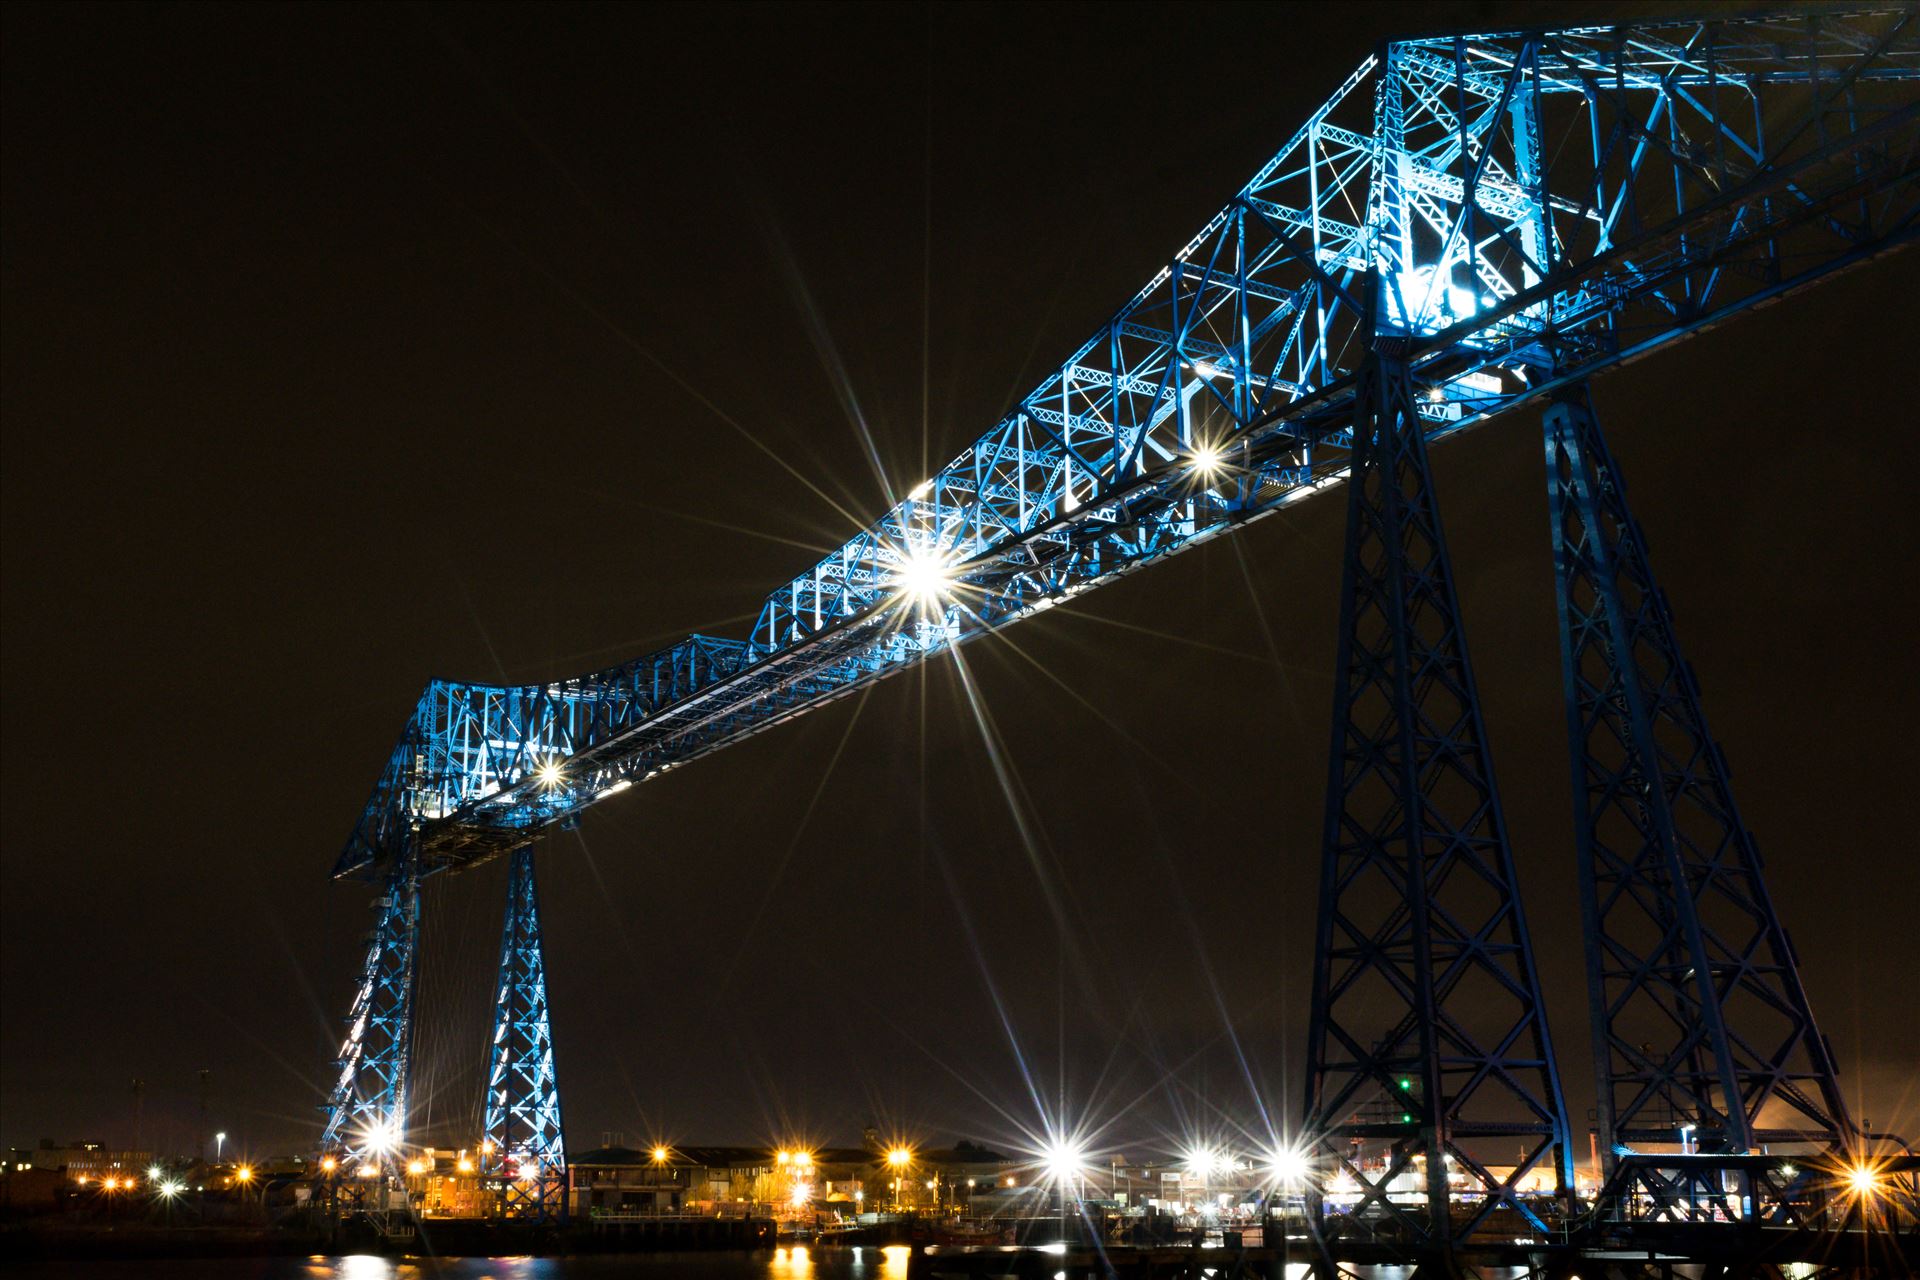 Transporter Bridge Post Clarence At Night One of the most famous bridges in the UK The Transporter Bridge at night, To buy this image or many more of this iconic bridge, follow the link
https://www.clickasnap.com/i/432a83g7z5ewrczj by AJ Stoves Photography